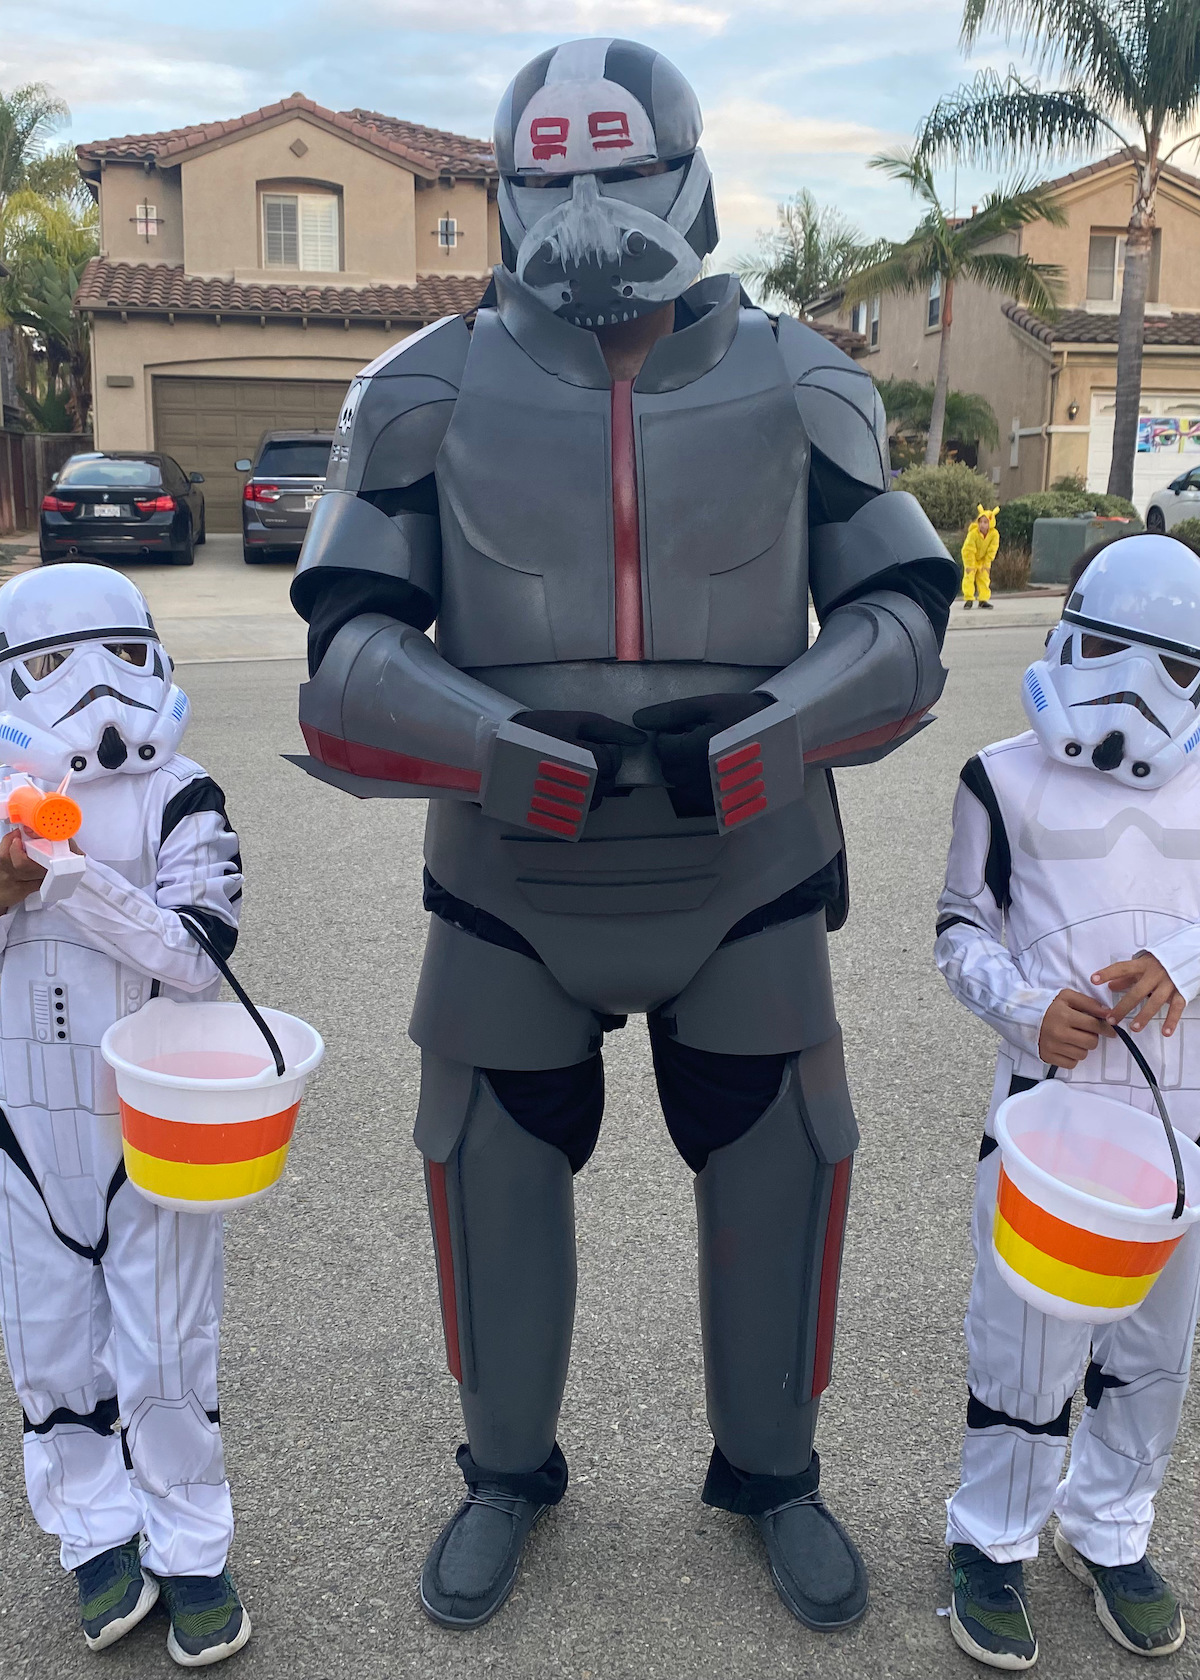 Wrecker costume, with stormtroopers